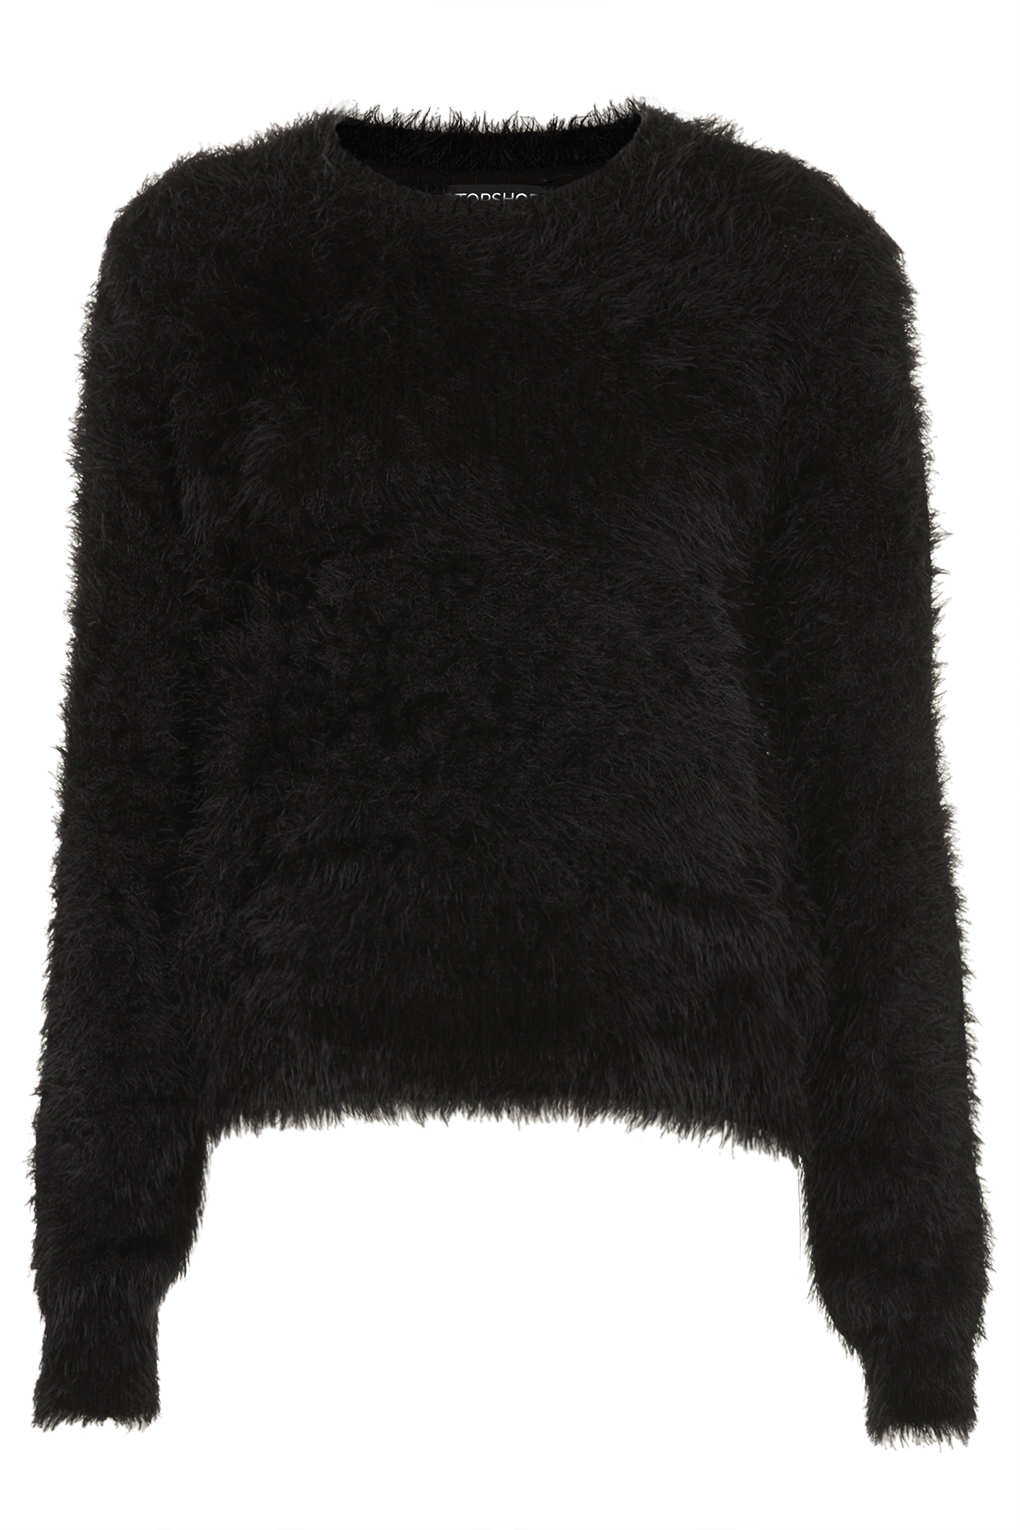 Topshop Knitted Fluffy Crew Jumper in Black | Lyst